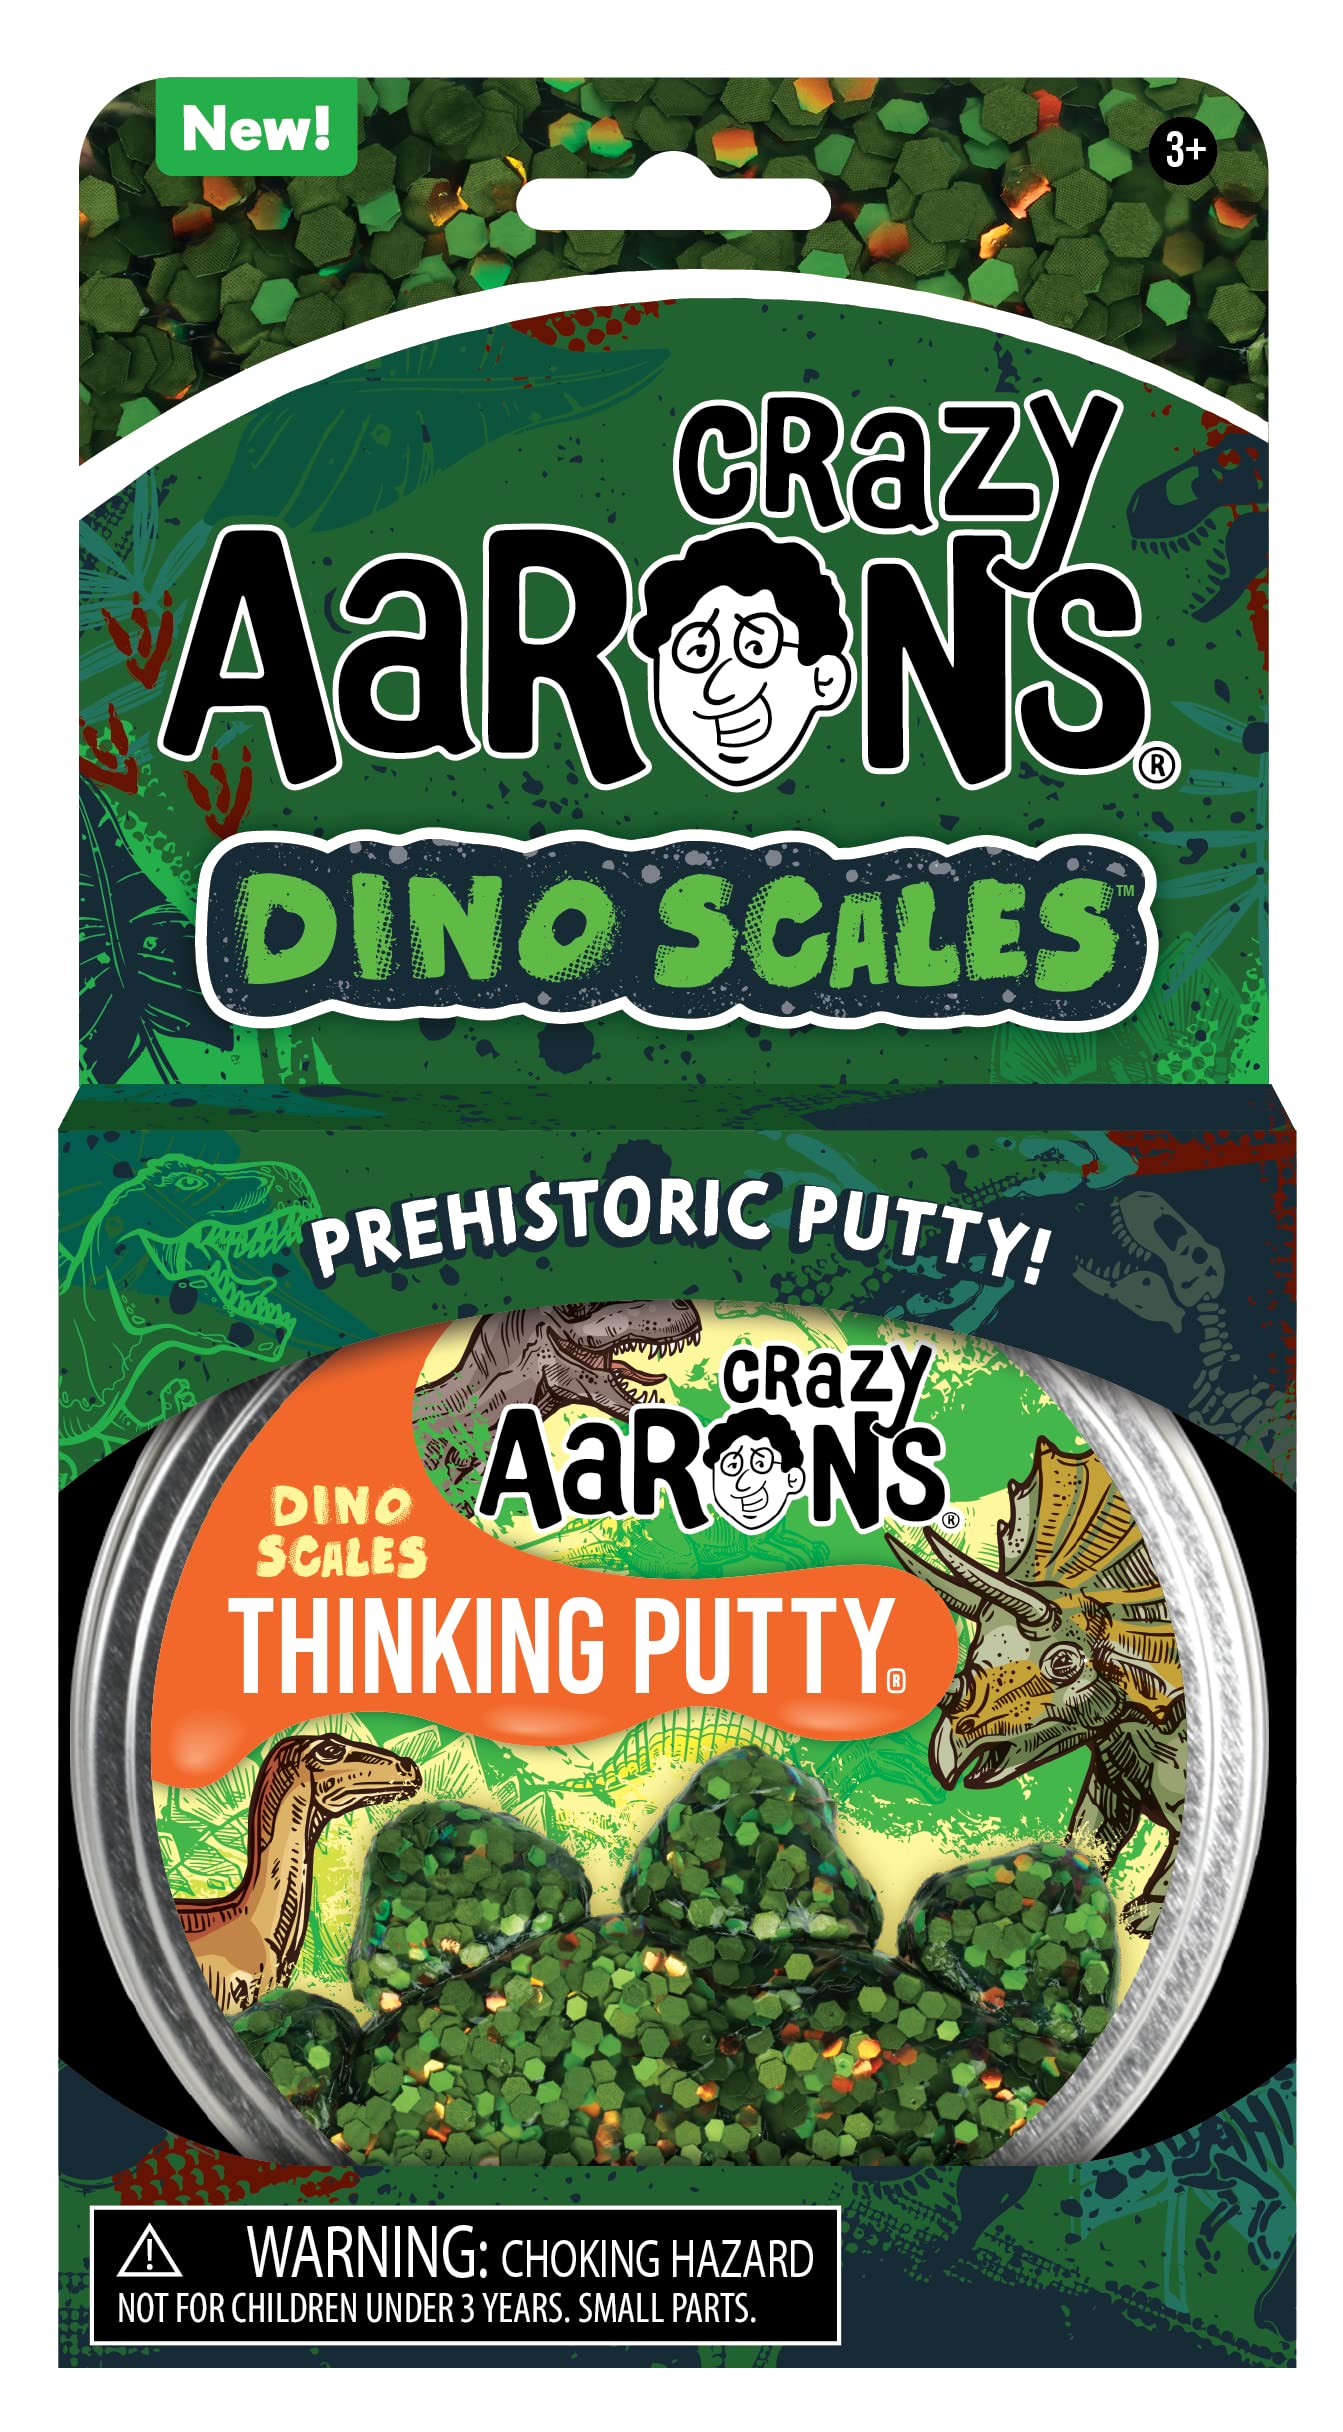 Aarons Dino Scales Putty